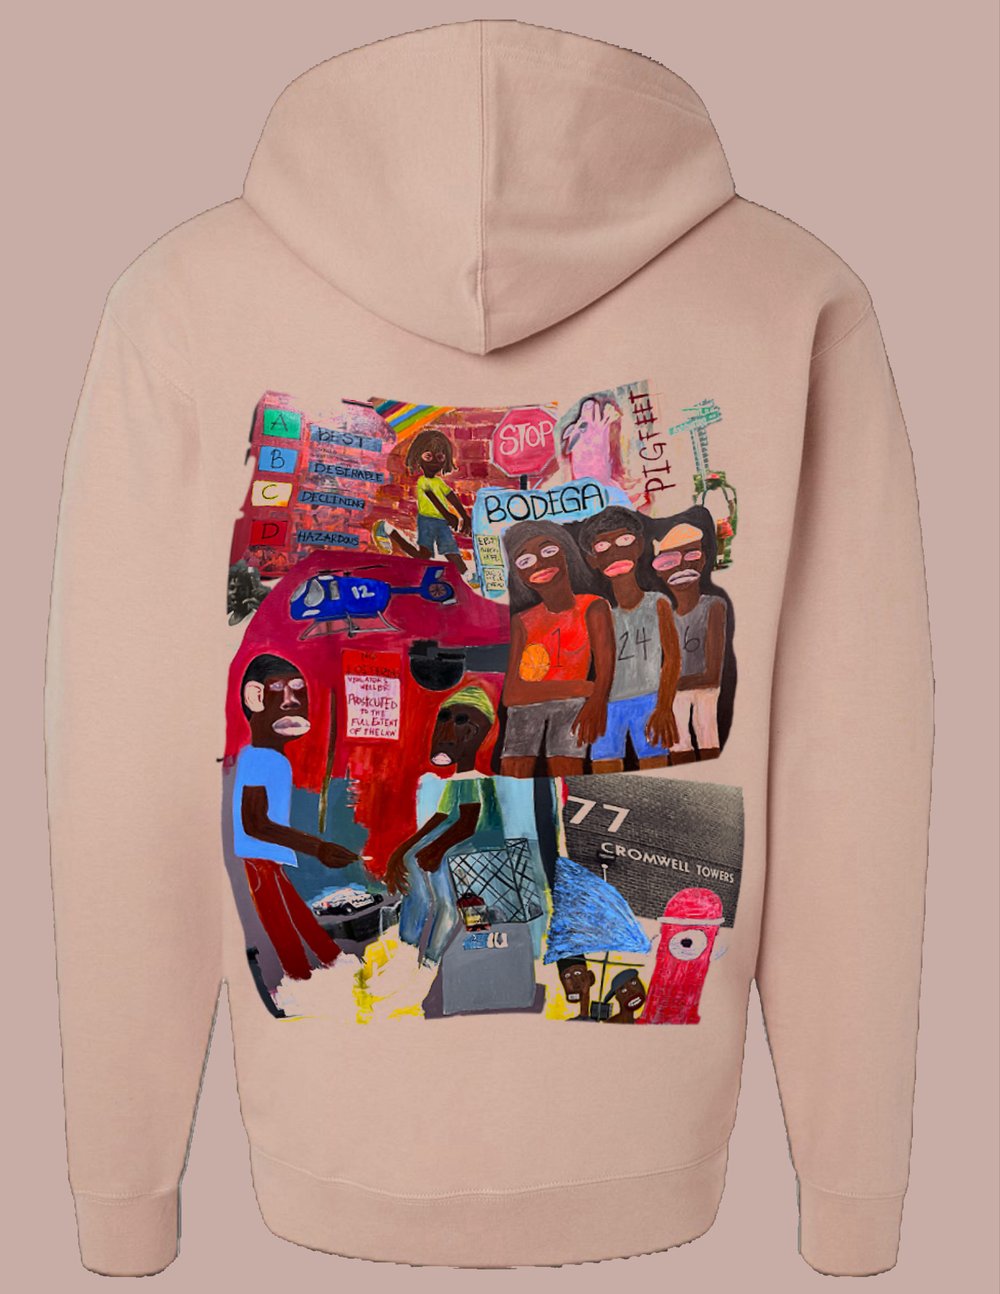 BUT ITS OURS COLLAGE HOODIE 